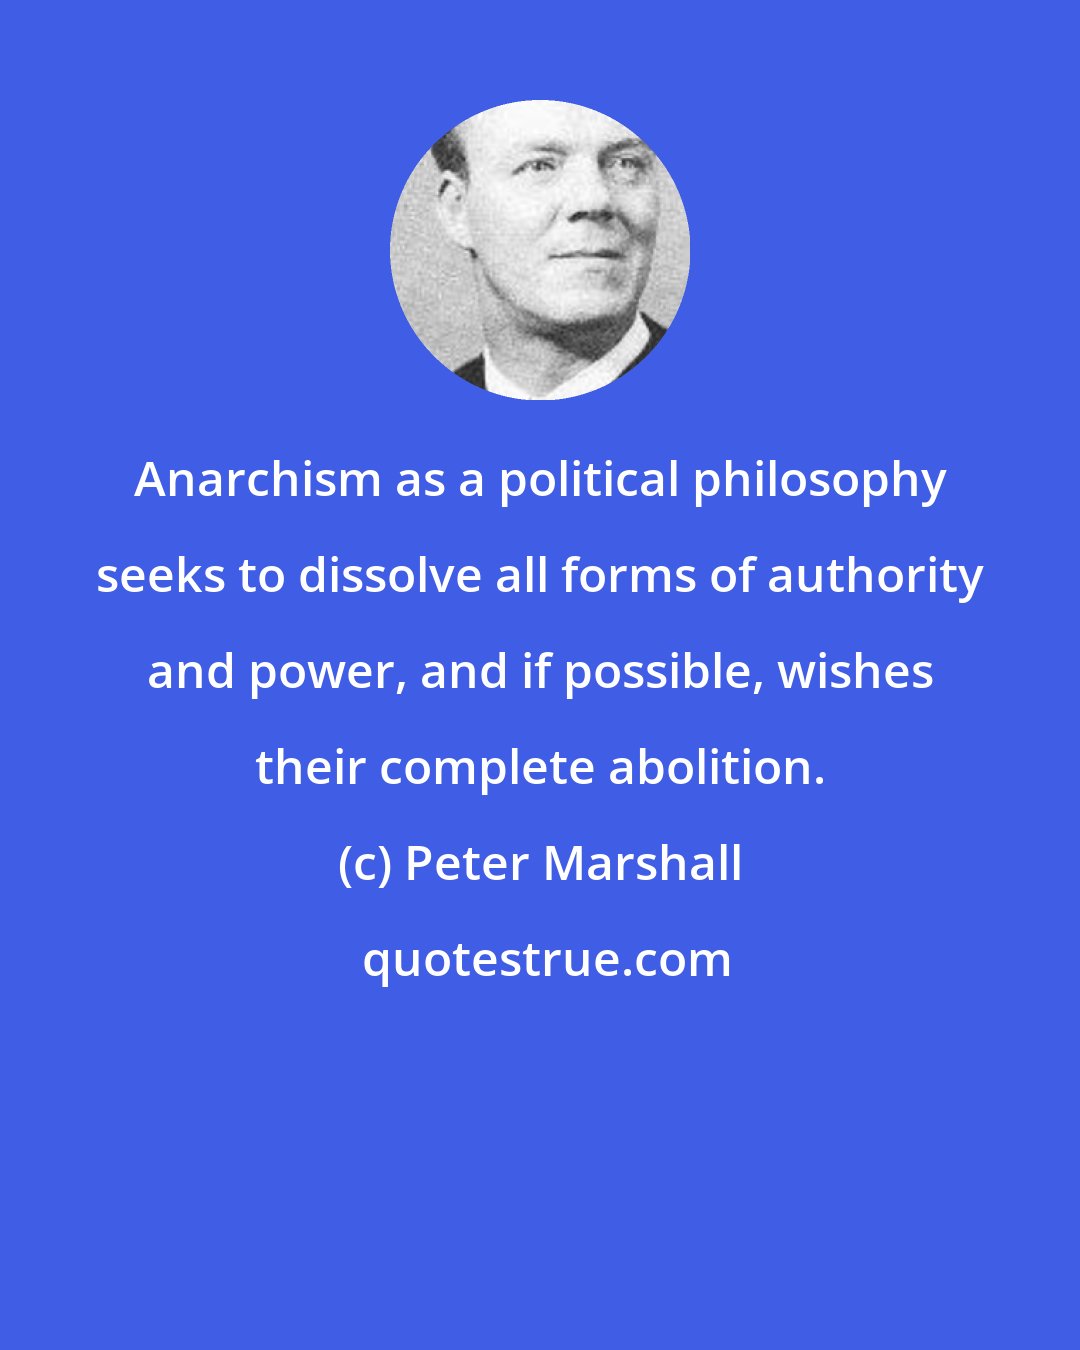 Peter Marshall: Anarchism as a political philosophy seeks to dissolve all forms of authority and power, and if possible, wishes their complete abolition.